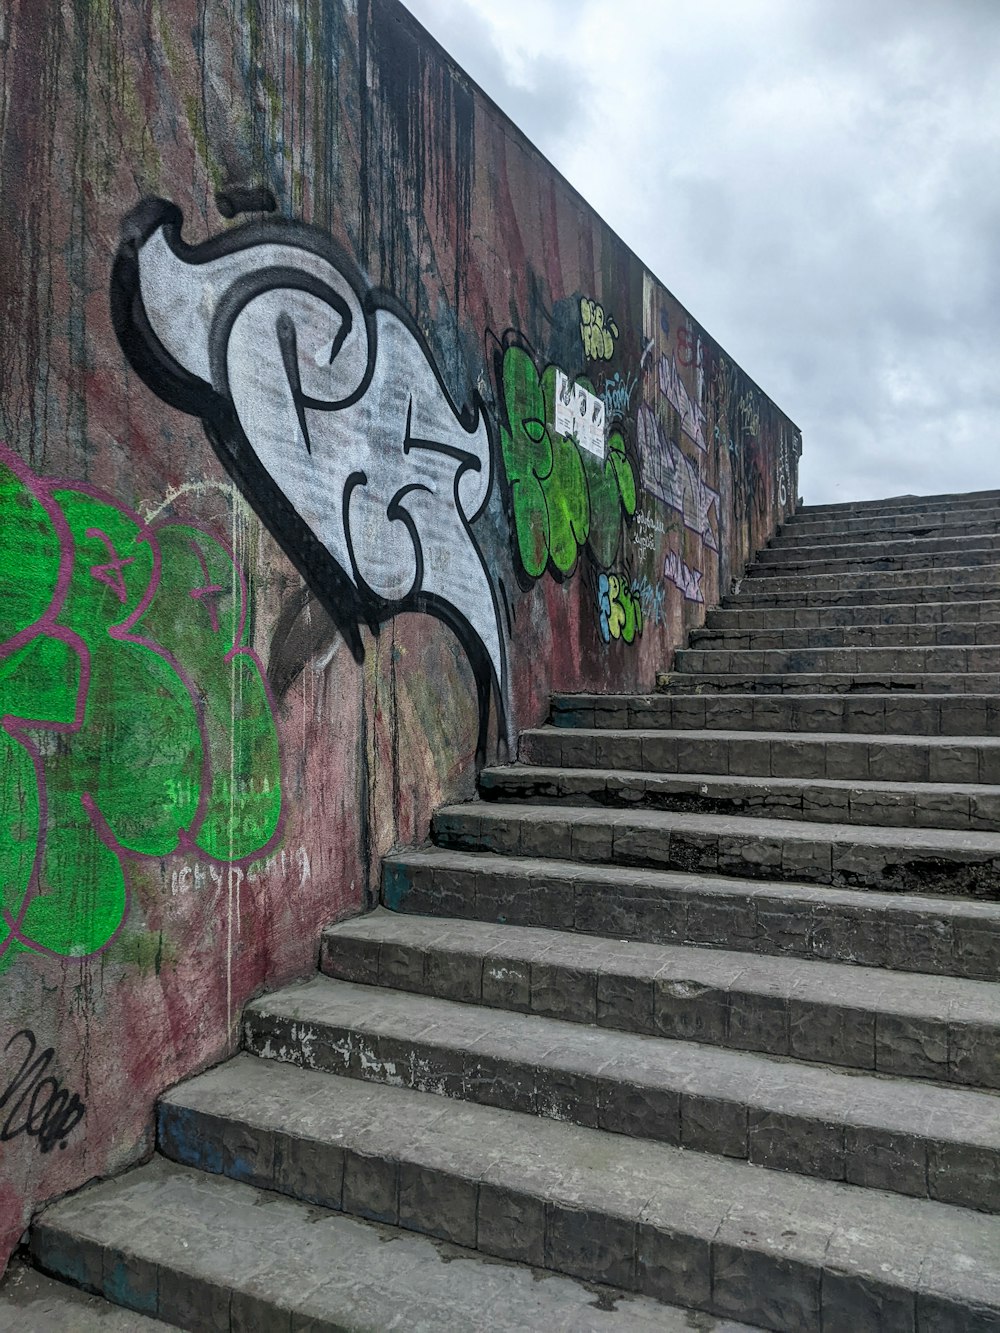 a bunch of steps with graffiti on them